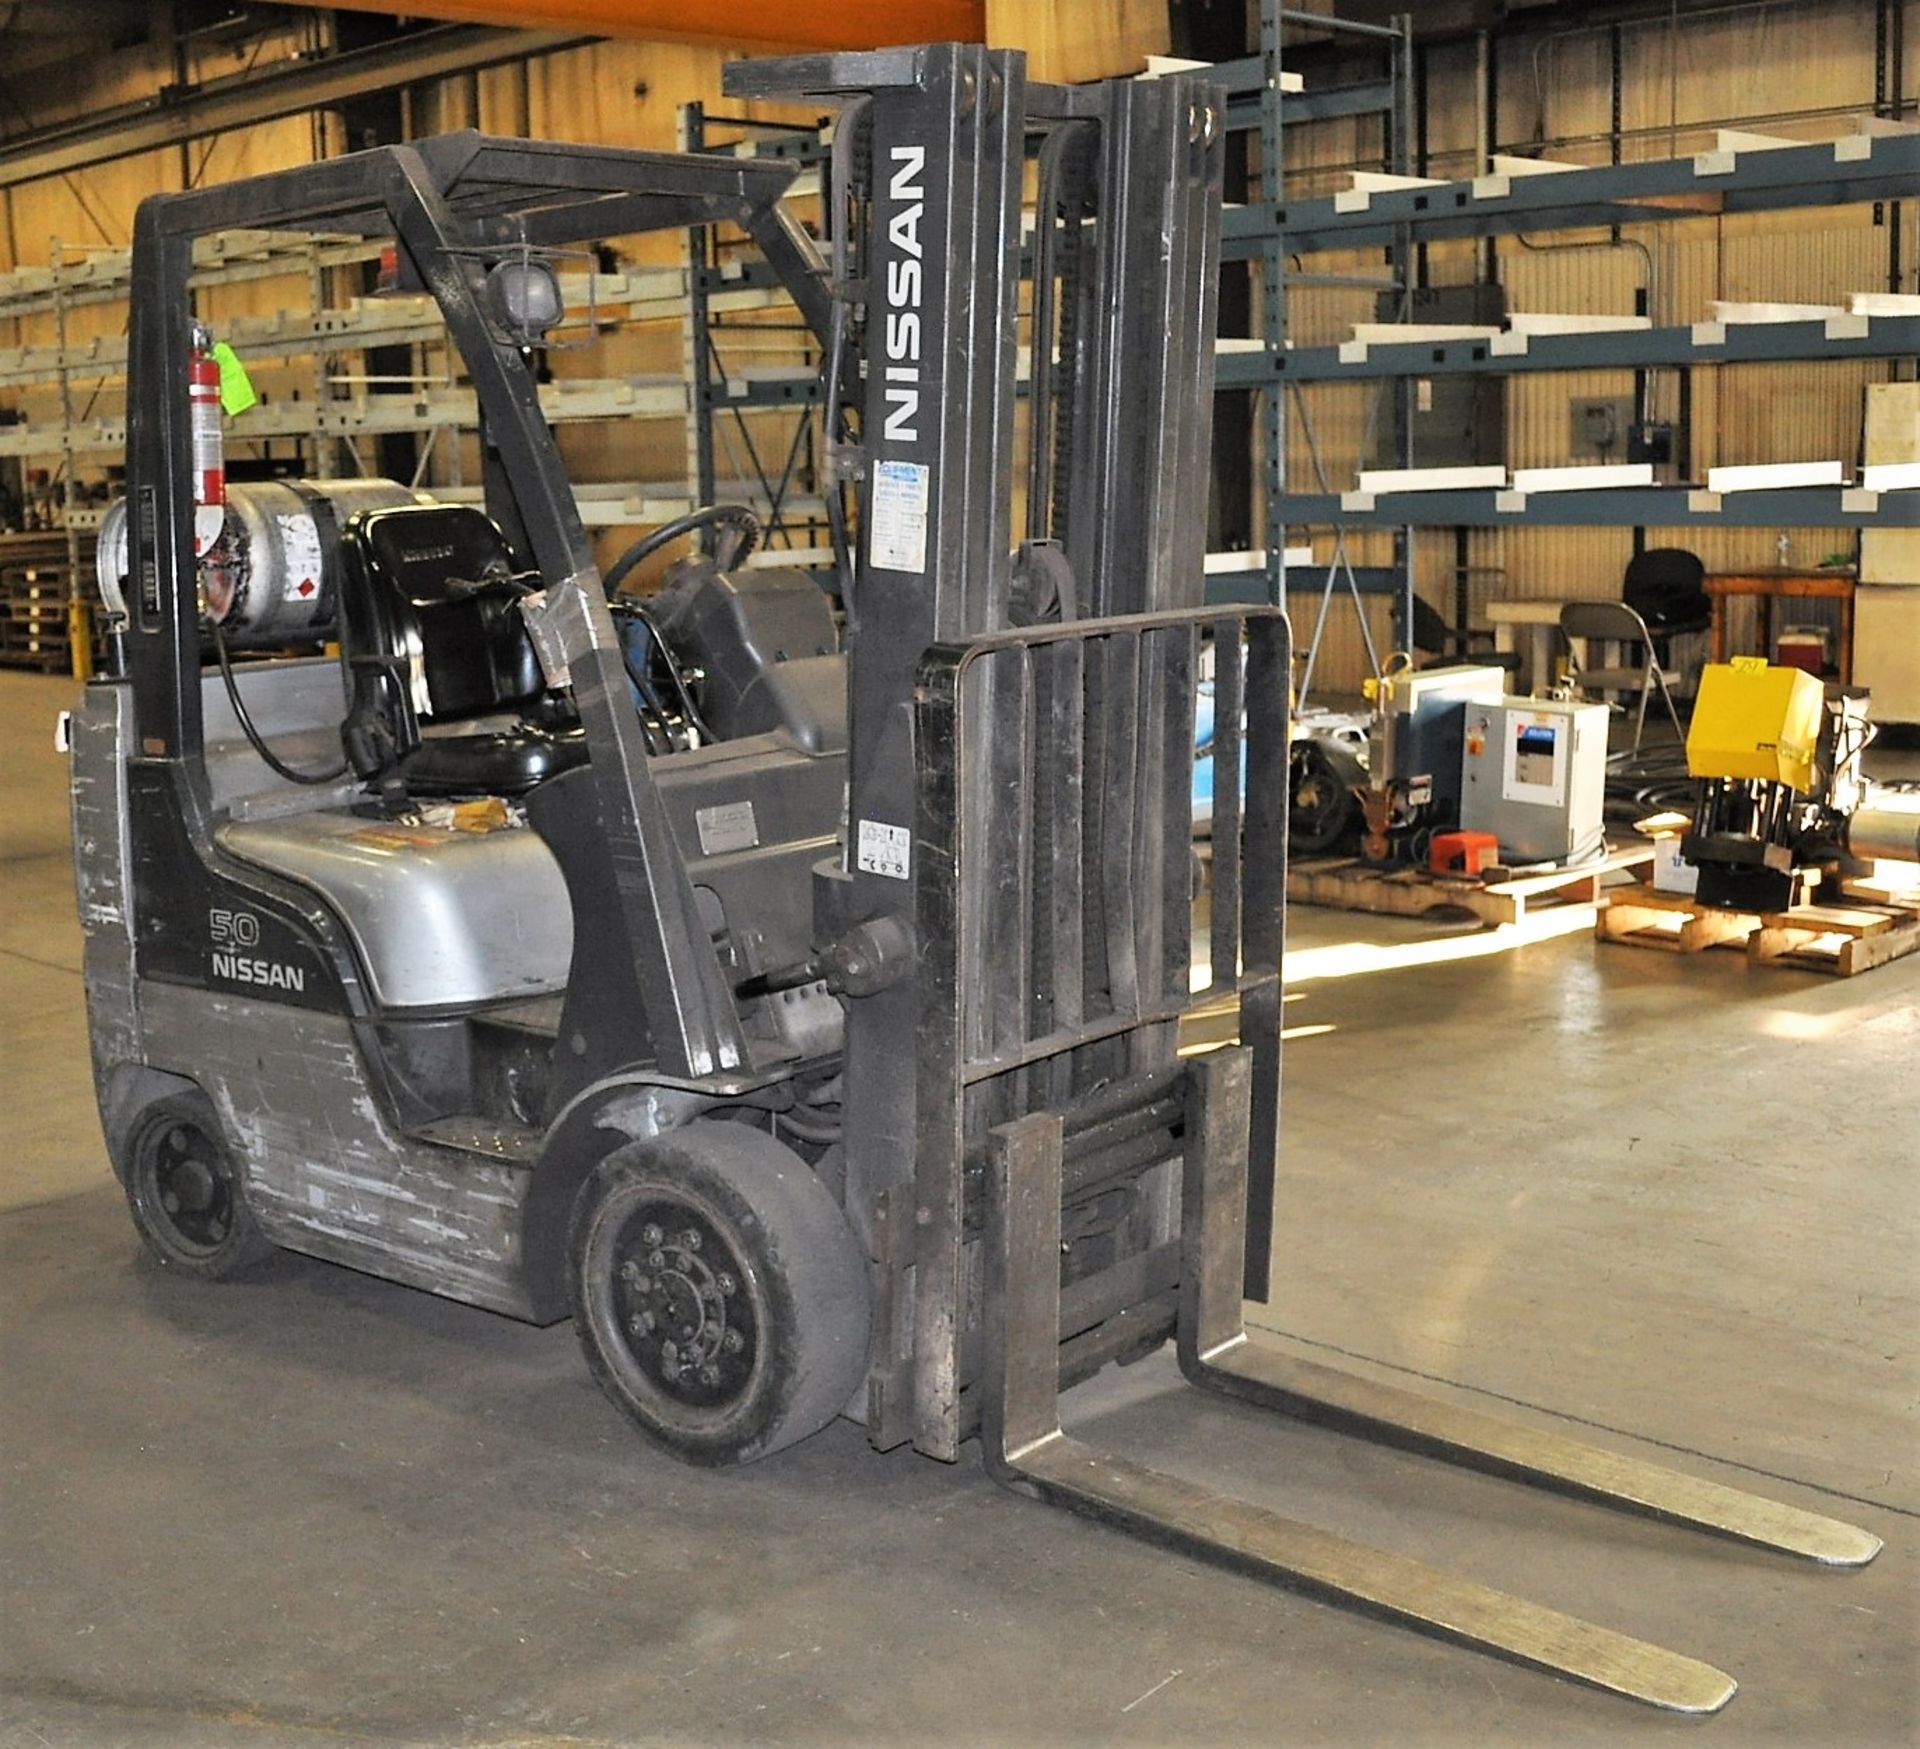 NISSAN MDL. MCPL02A25LV 3150# CAPACITY PROPANE FORKLIFT TRUCK, WITH 187" LIFT, SOLID TIRES, SIDE - Image 4 of 5